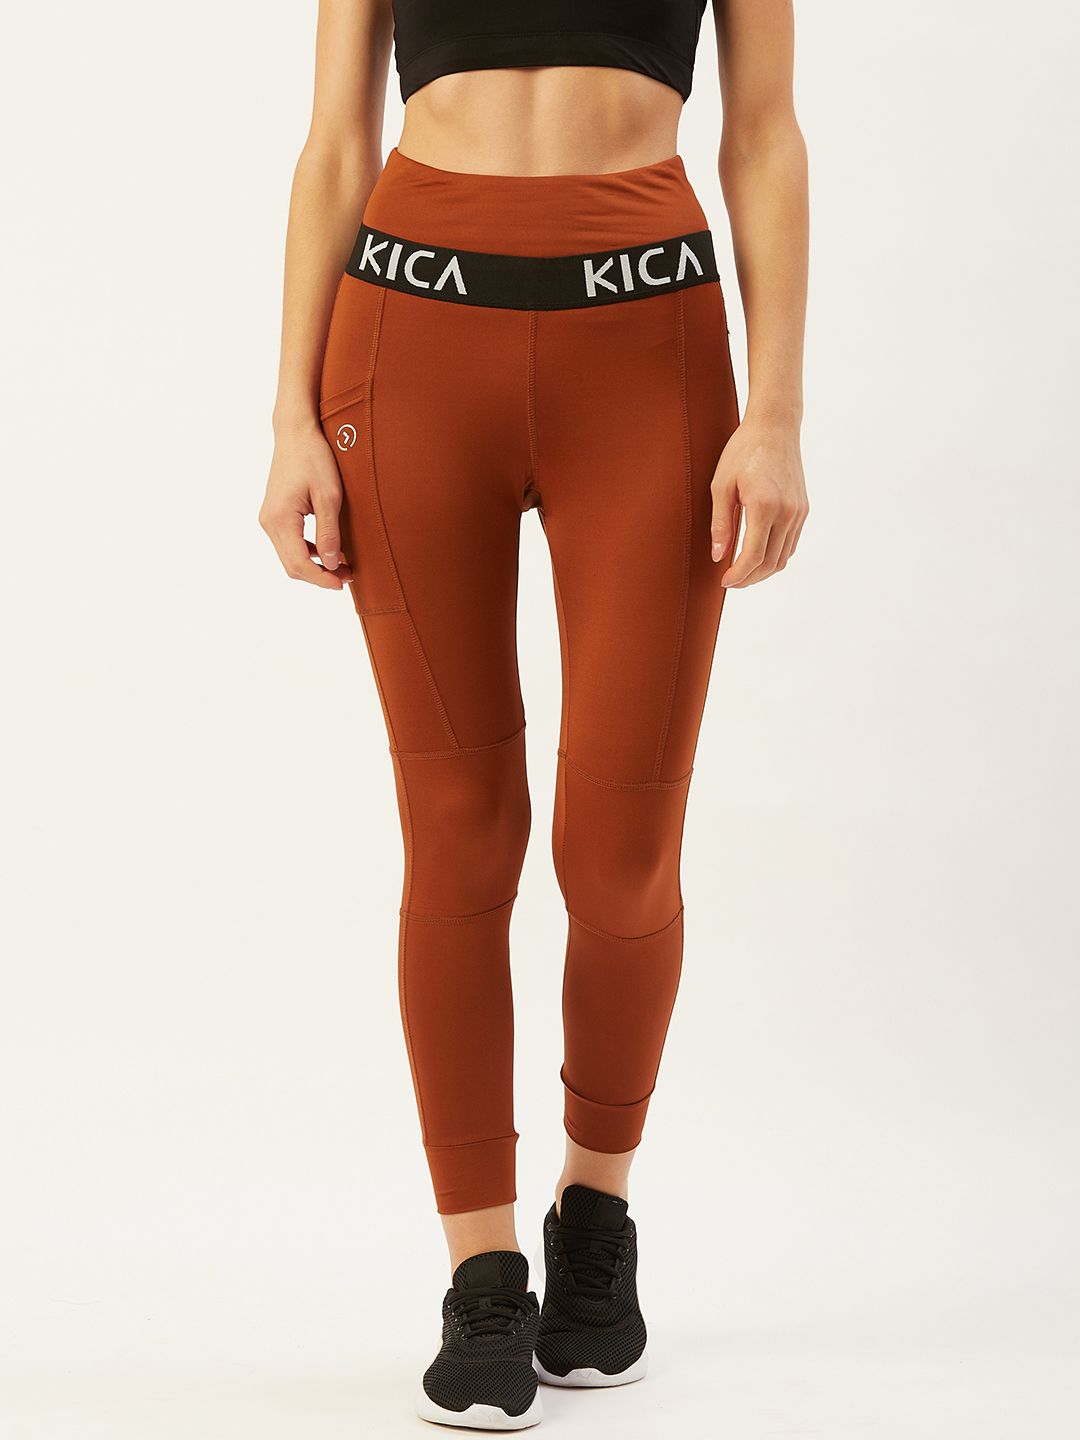 KICA Women Rust Brown High Waisted Leggings With Elastic Print Waistband Price in India